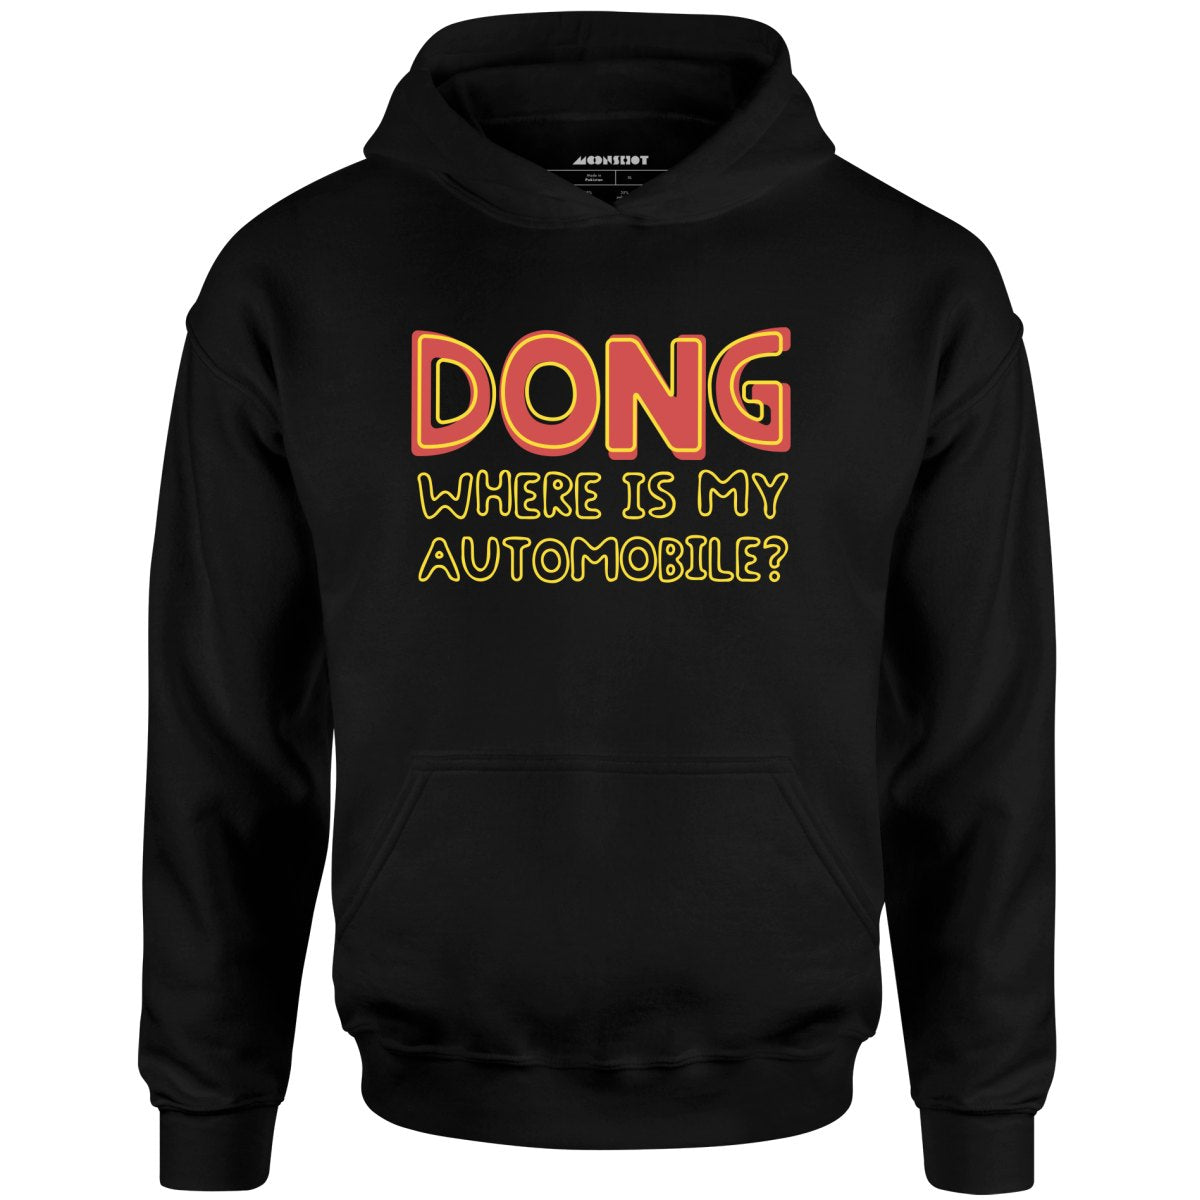 Dong Where is My Automobile? - Unisex Hoodie